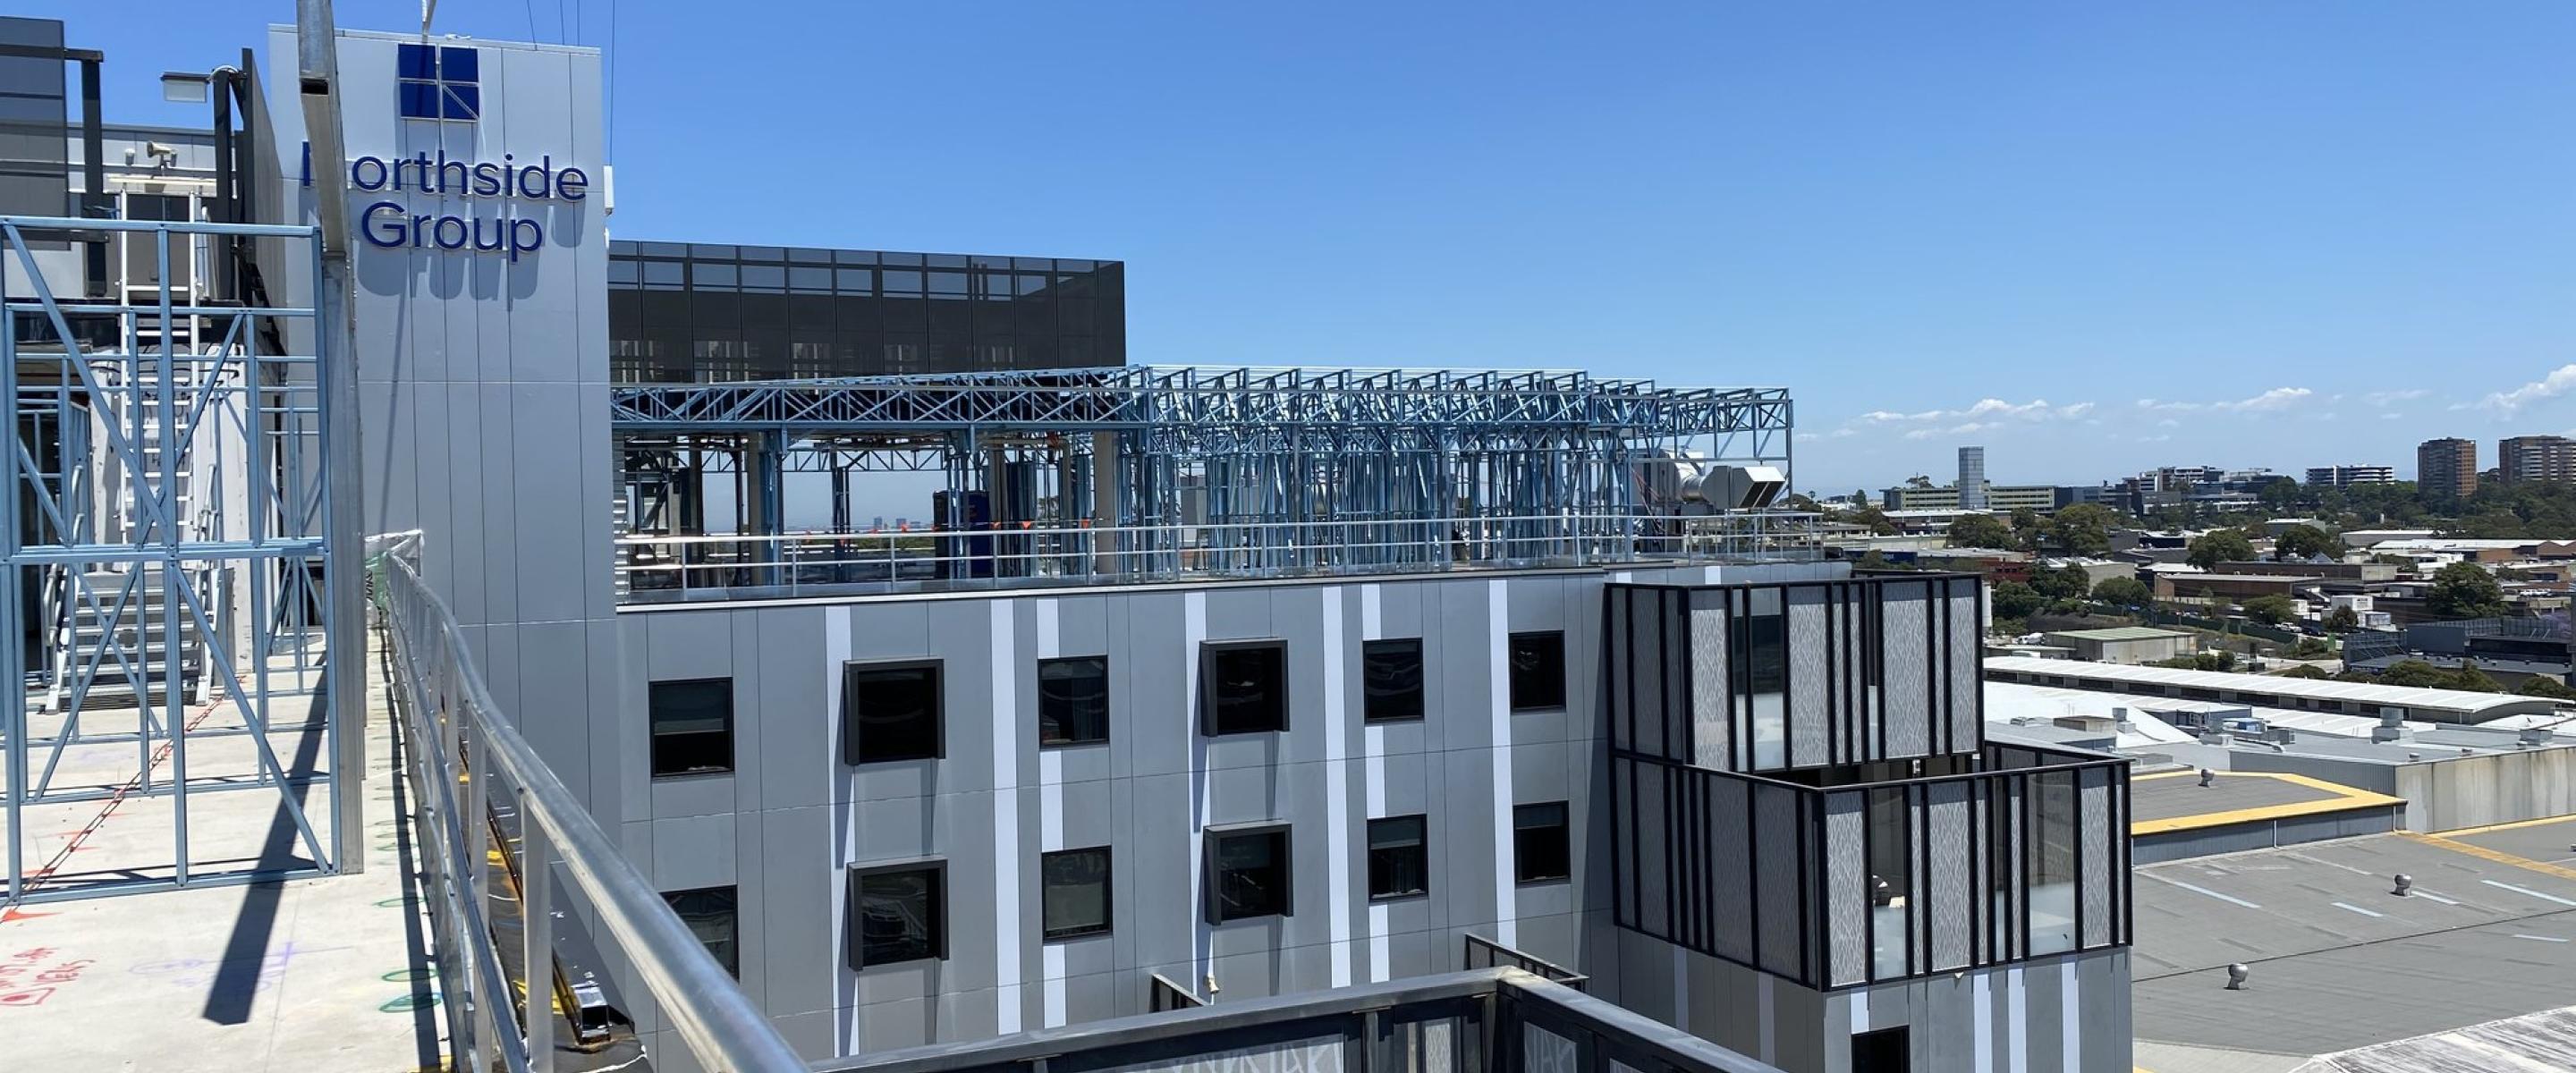 Ramsay Clinic Northside - TRUECORE® steel -  large sections of the near complete façade system were externally craned into position